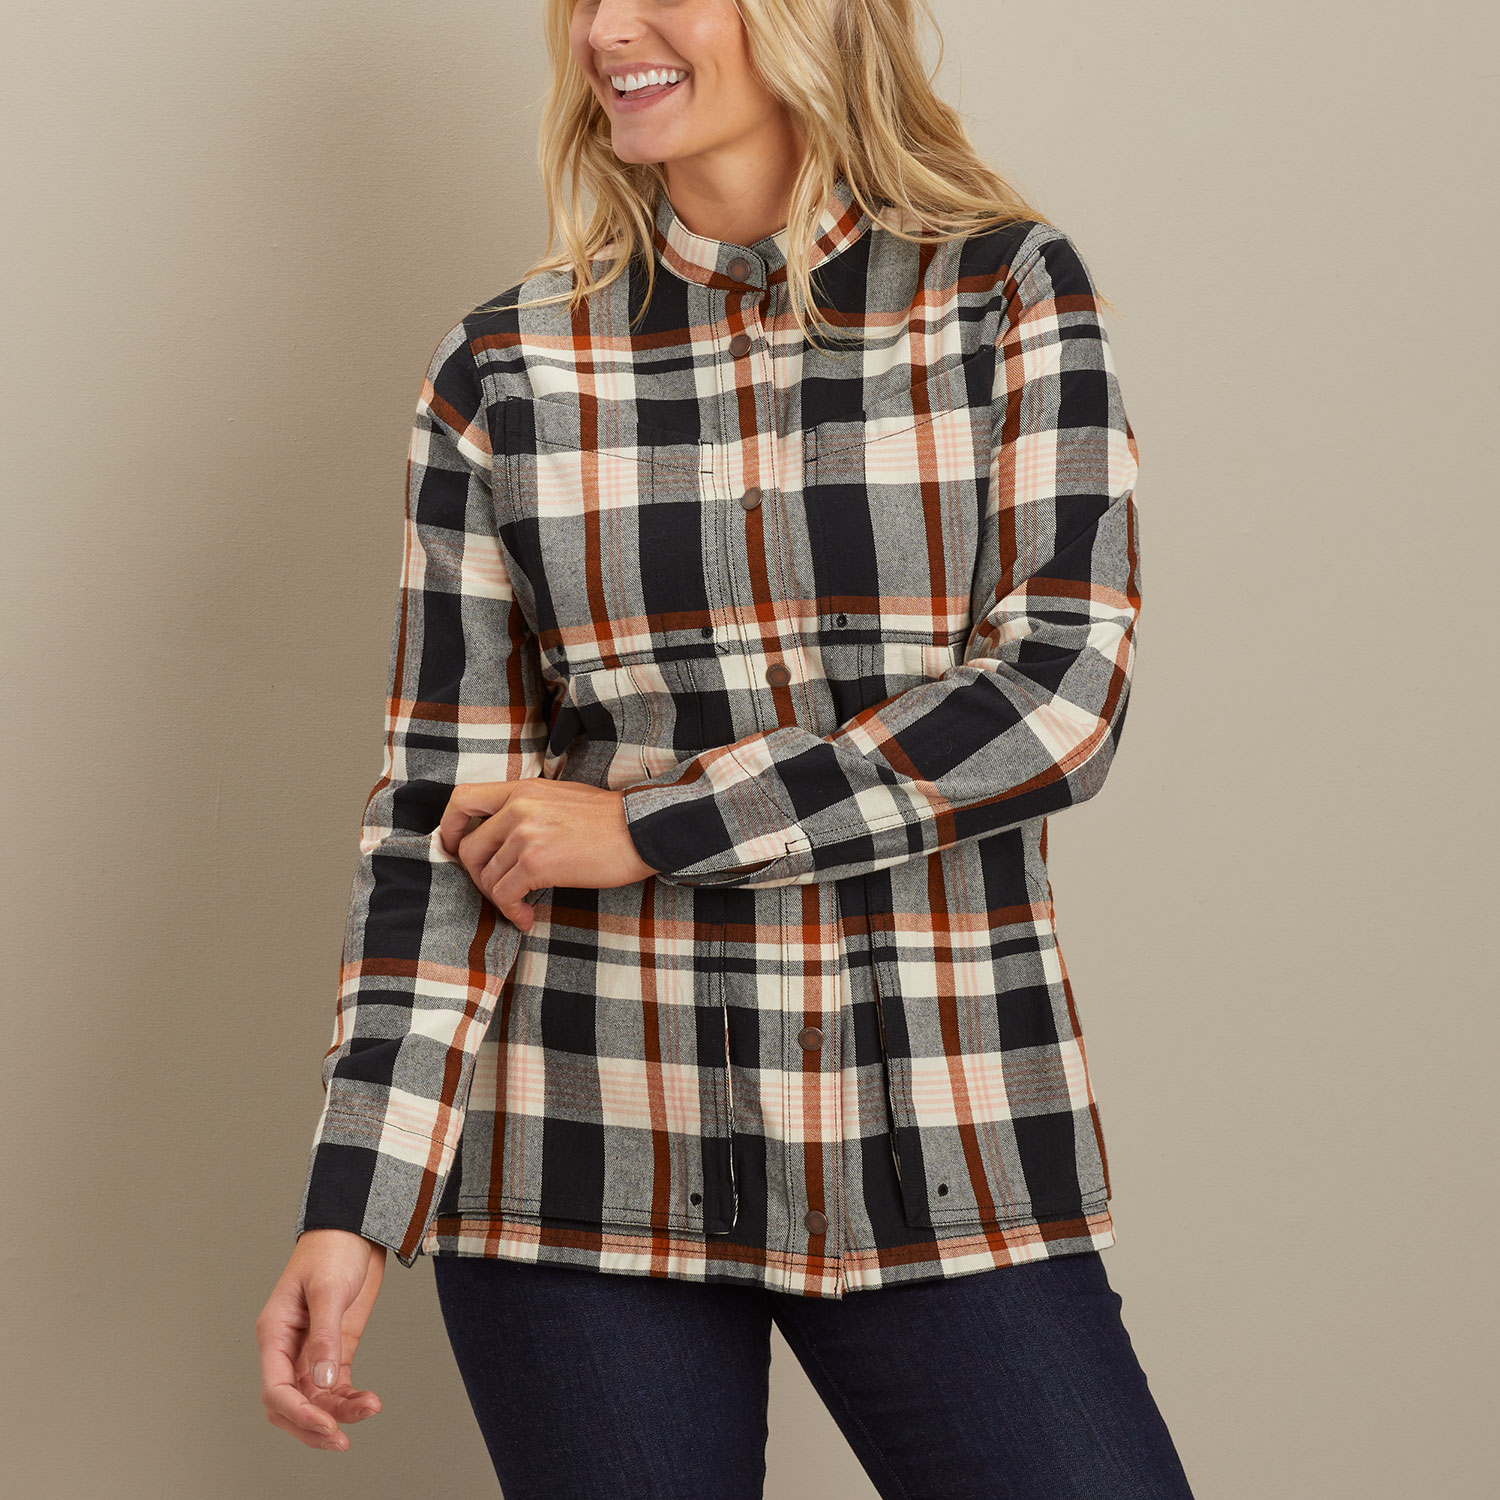 Lumberjack Ladies and Woodworker Women Feature in Duluth Trading